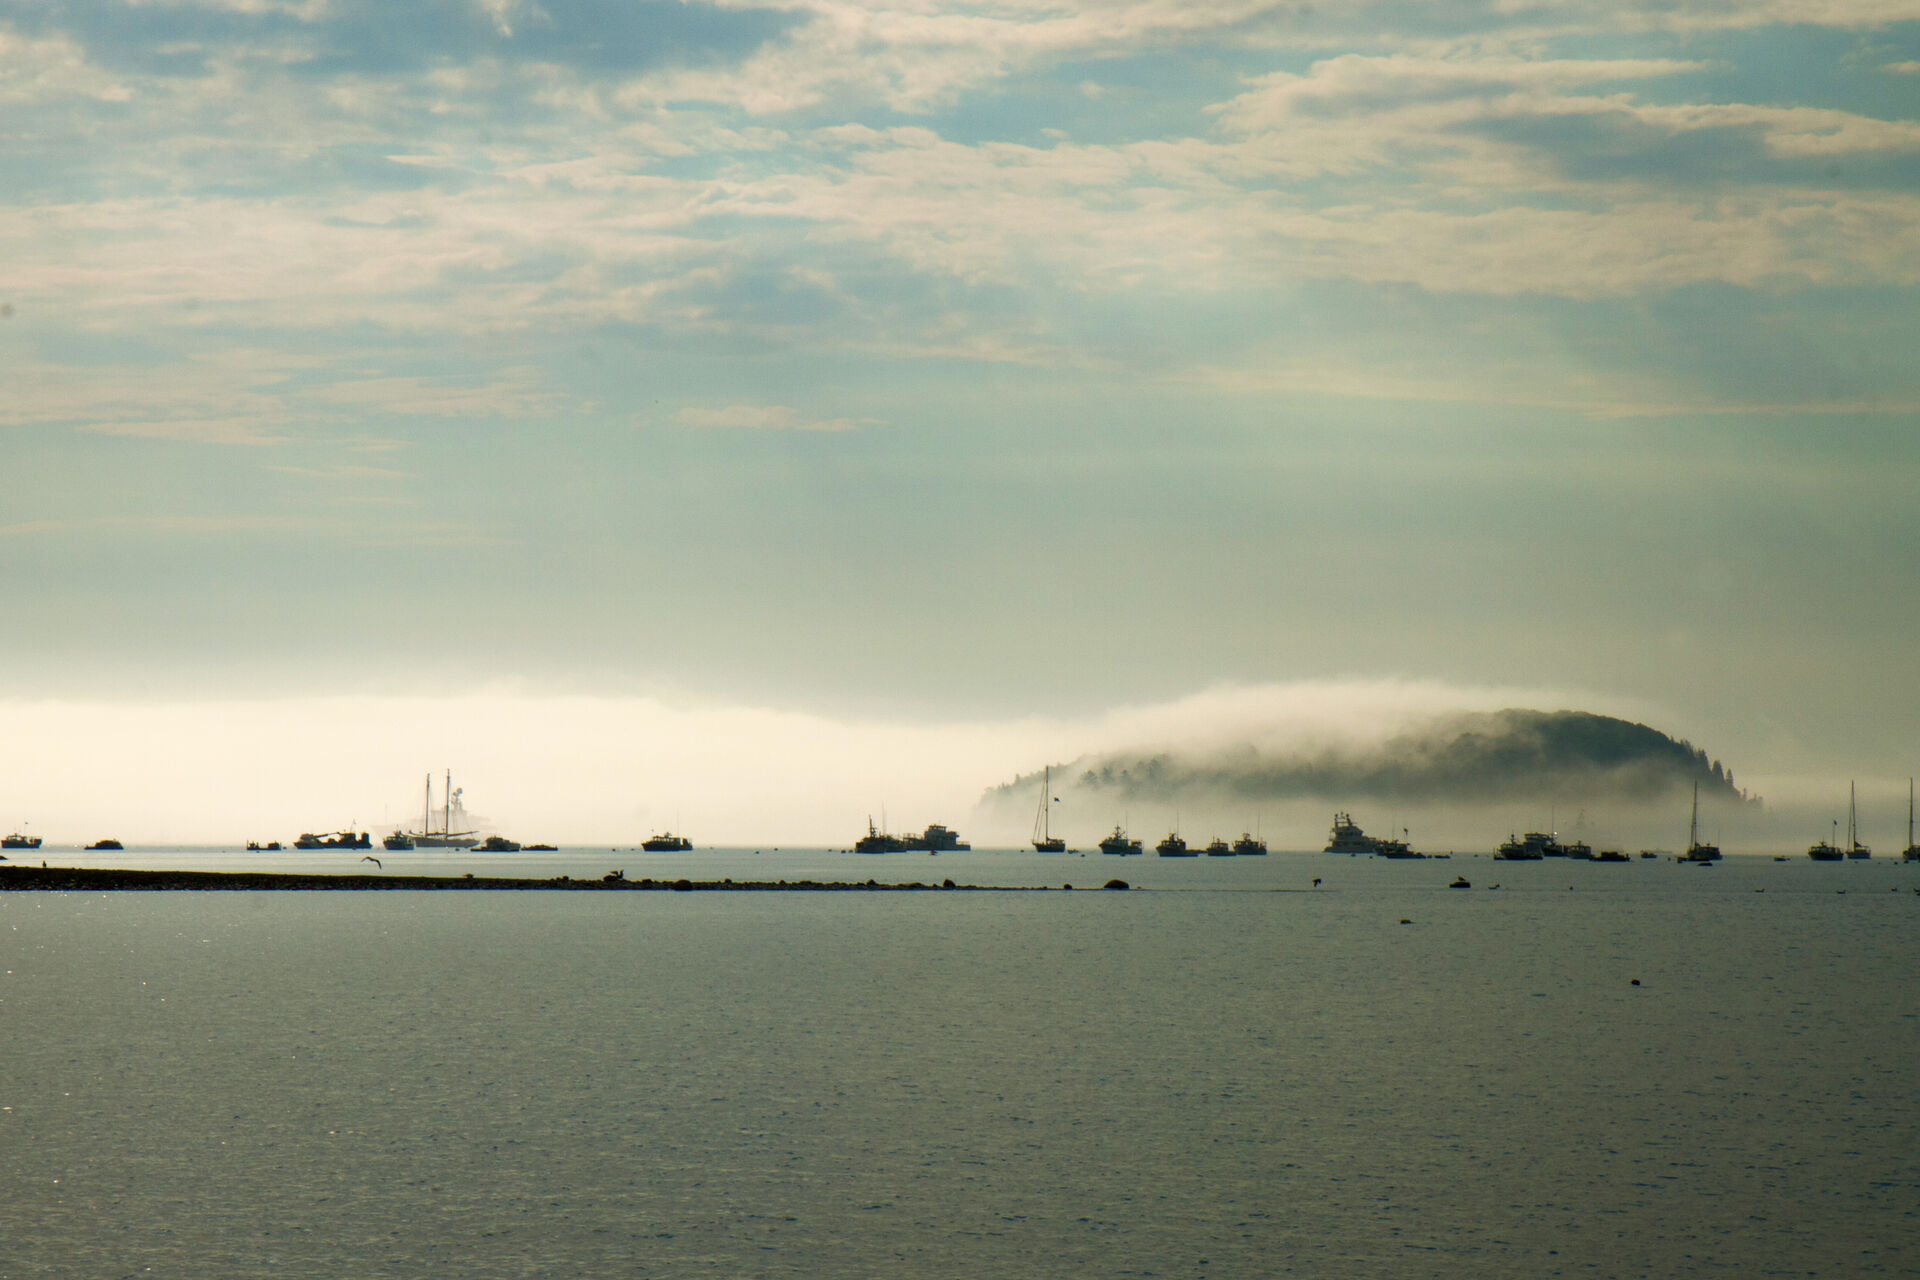 A sea monster rising out of the fog.